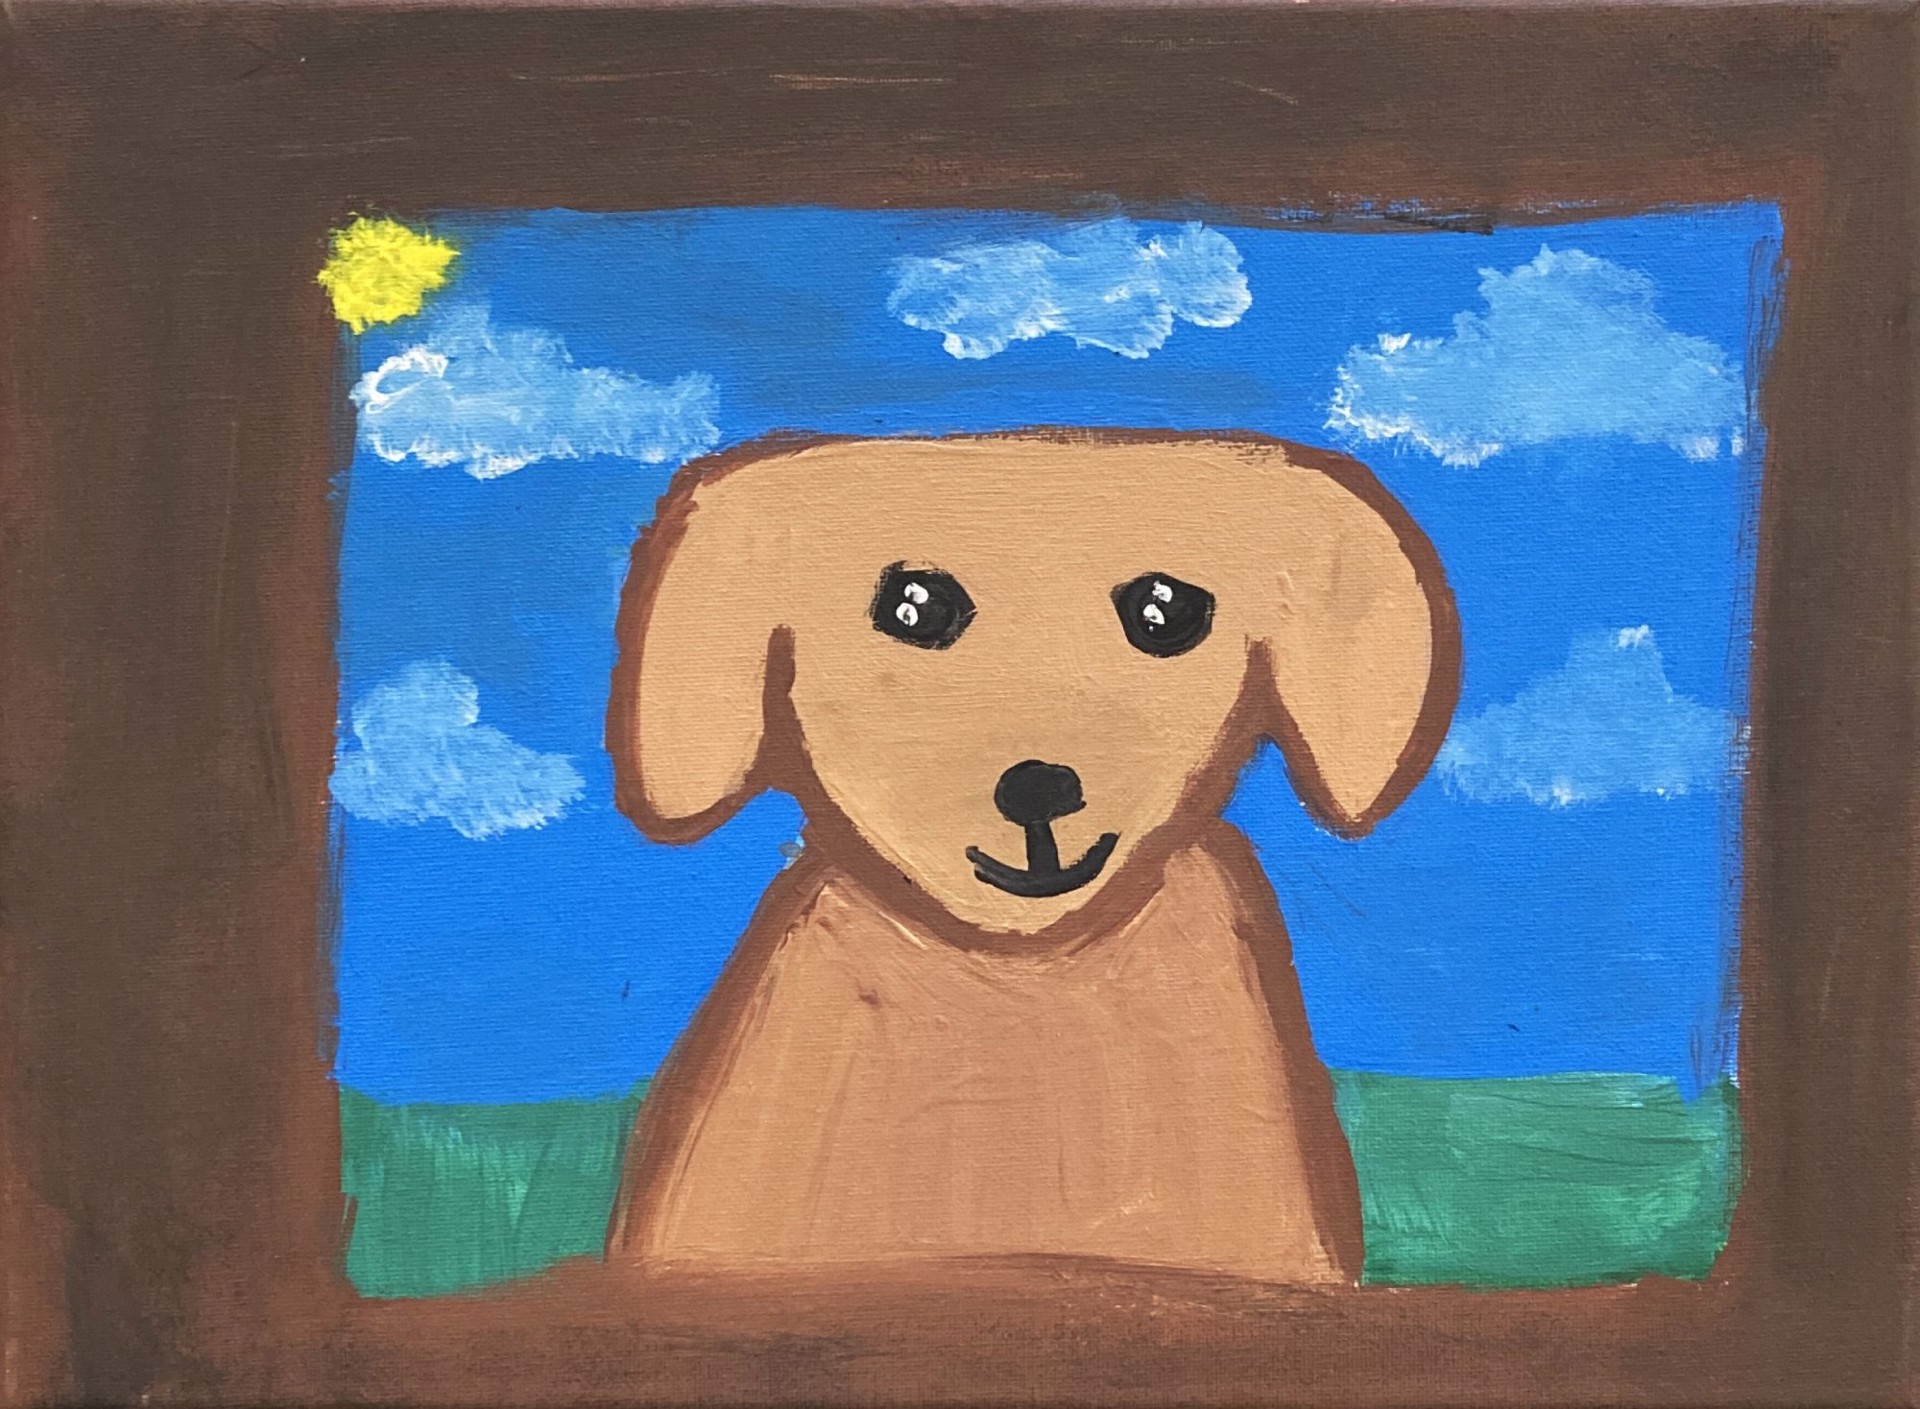 "The Puppy" by Huff (Autism Academy) by Art One Foundation